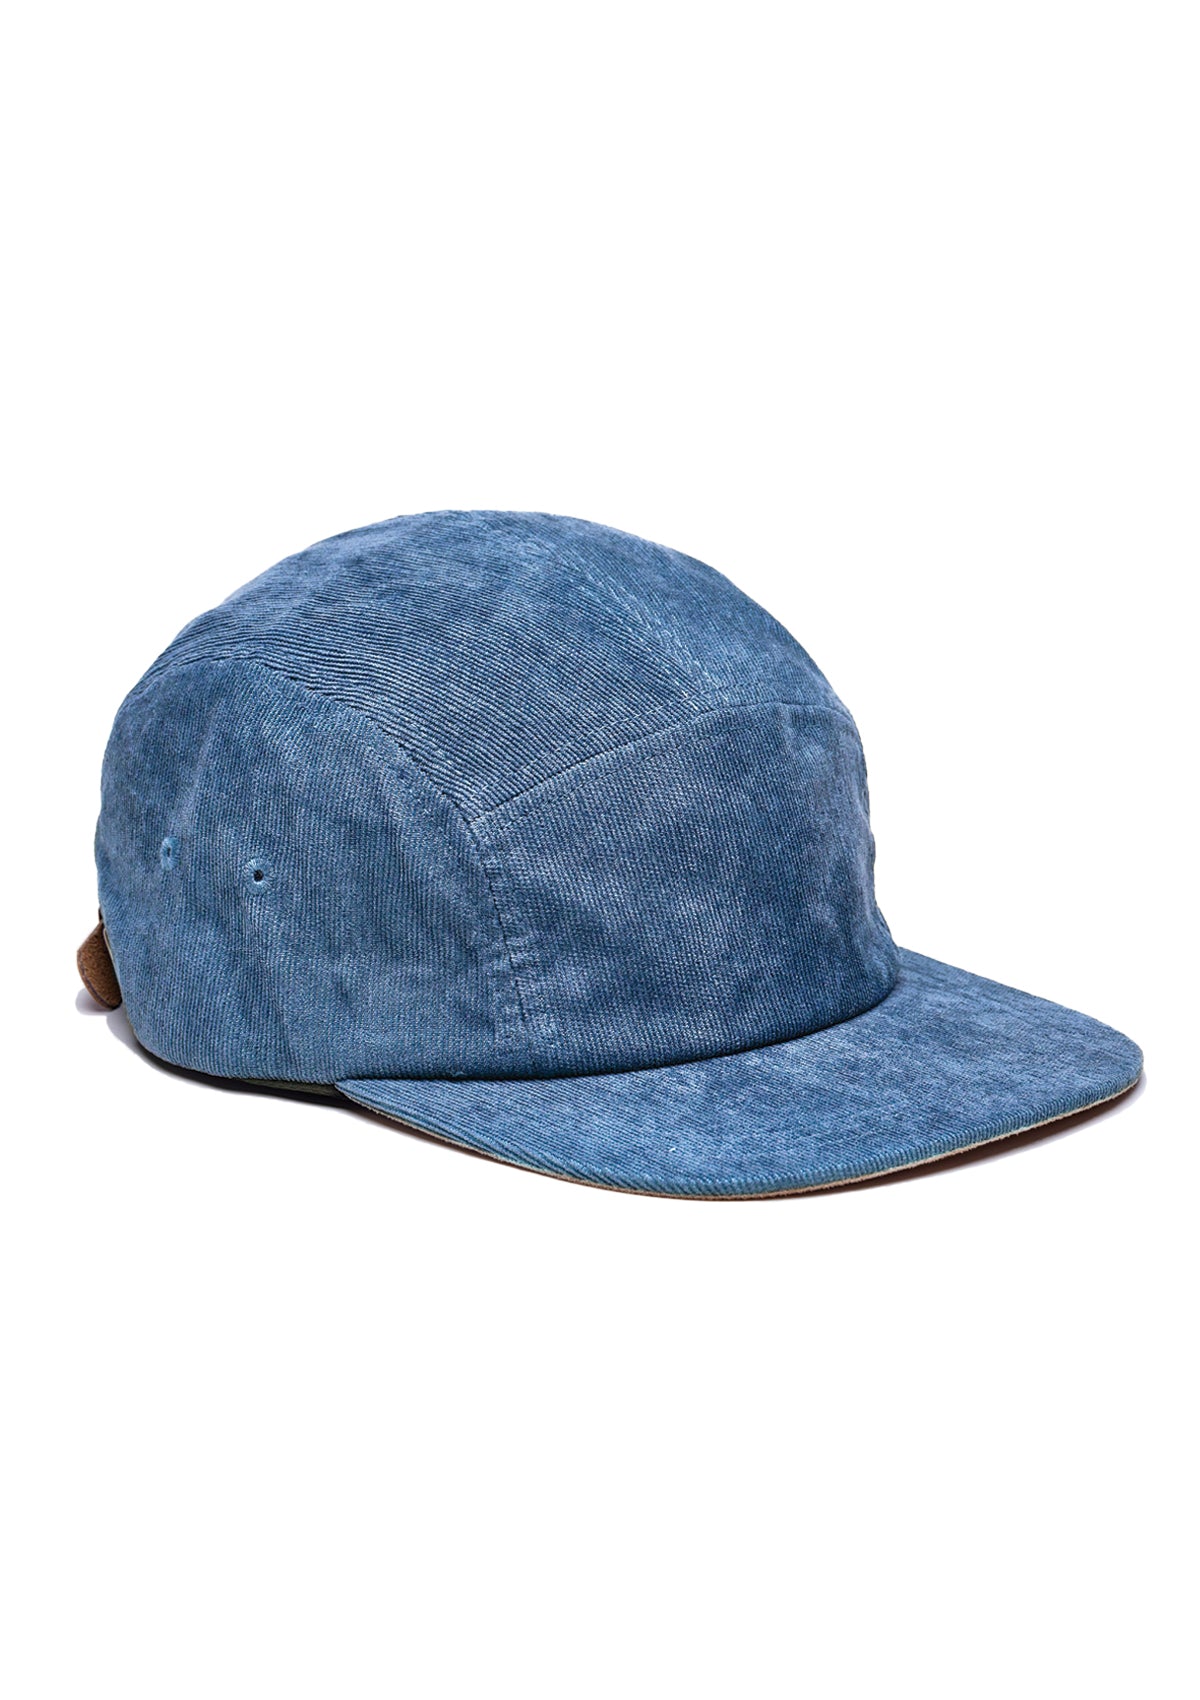 Washed Cord Cap - Ocean